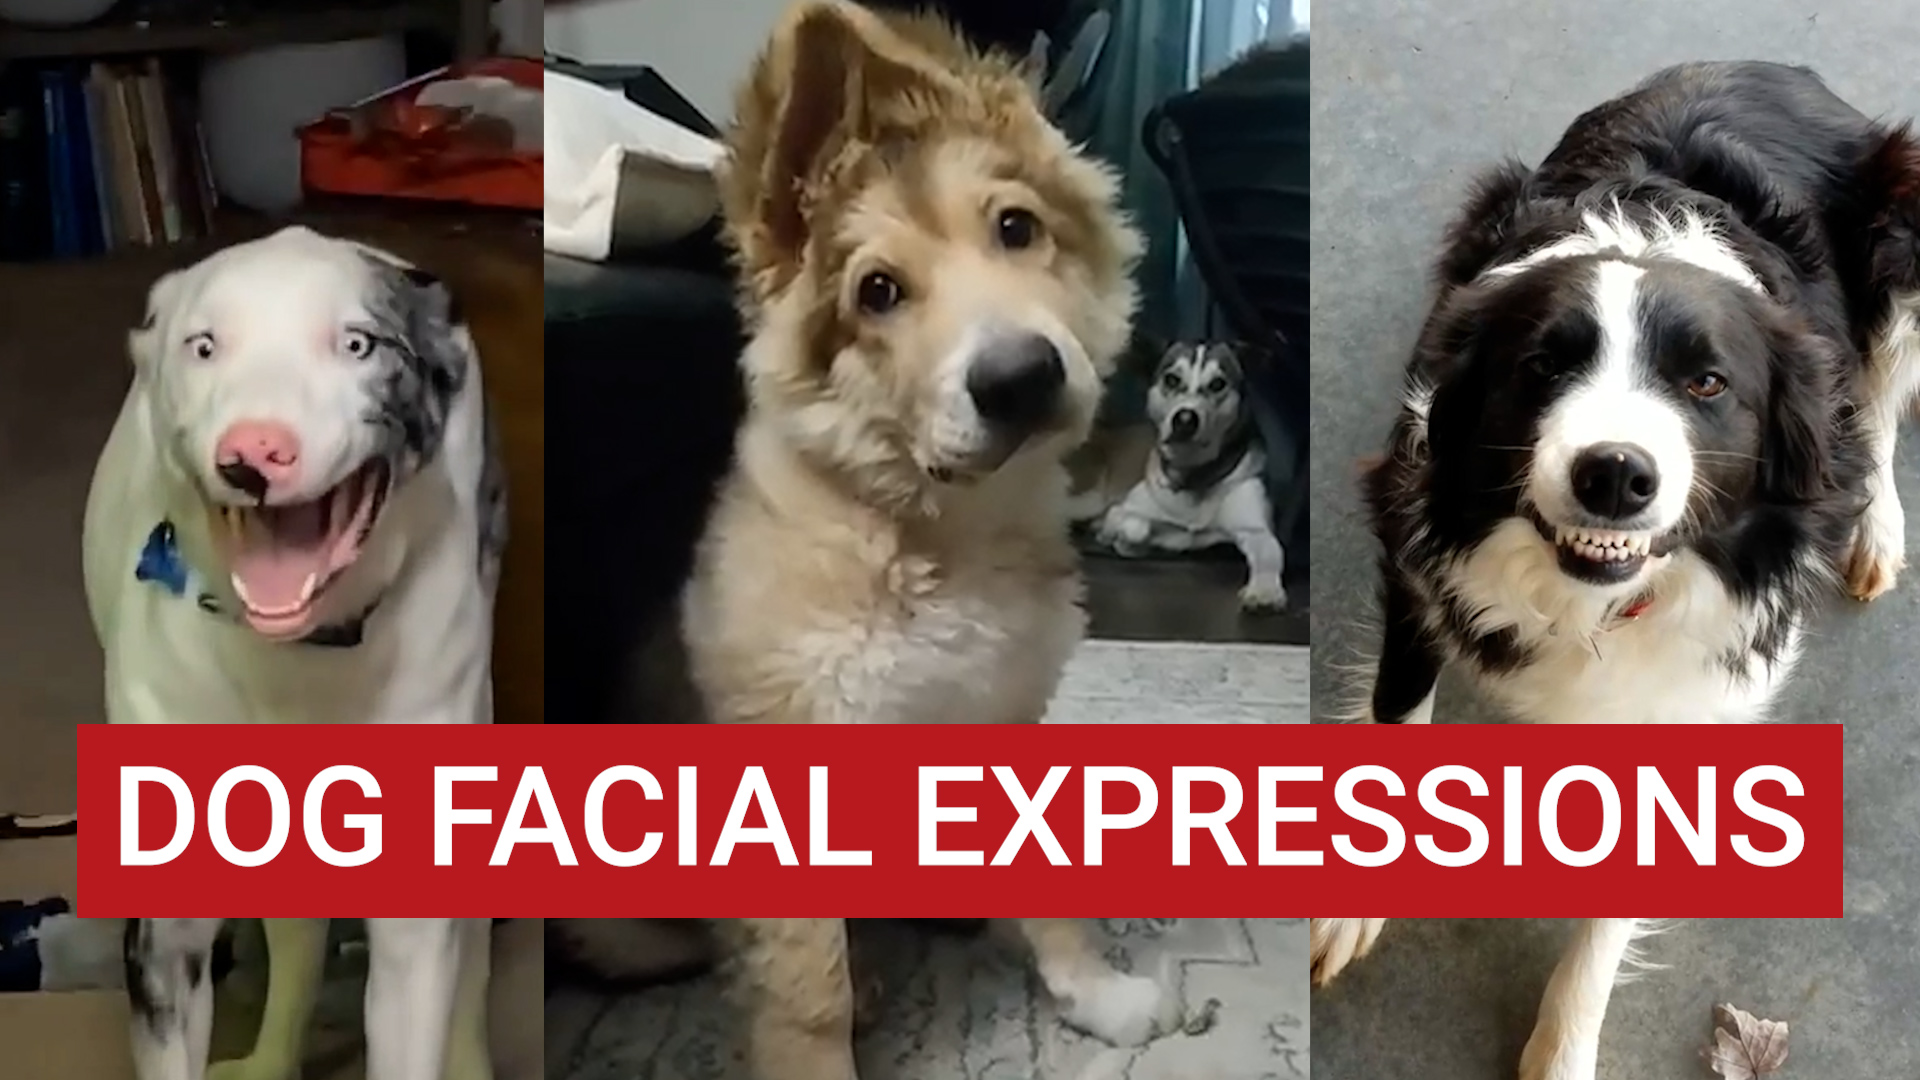 Can Dogs Make Facial Expressions